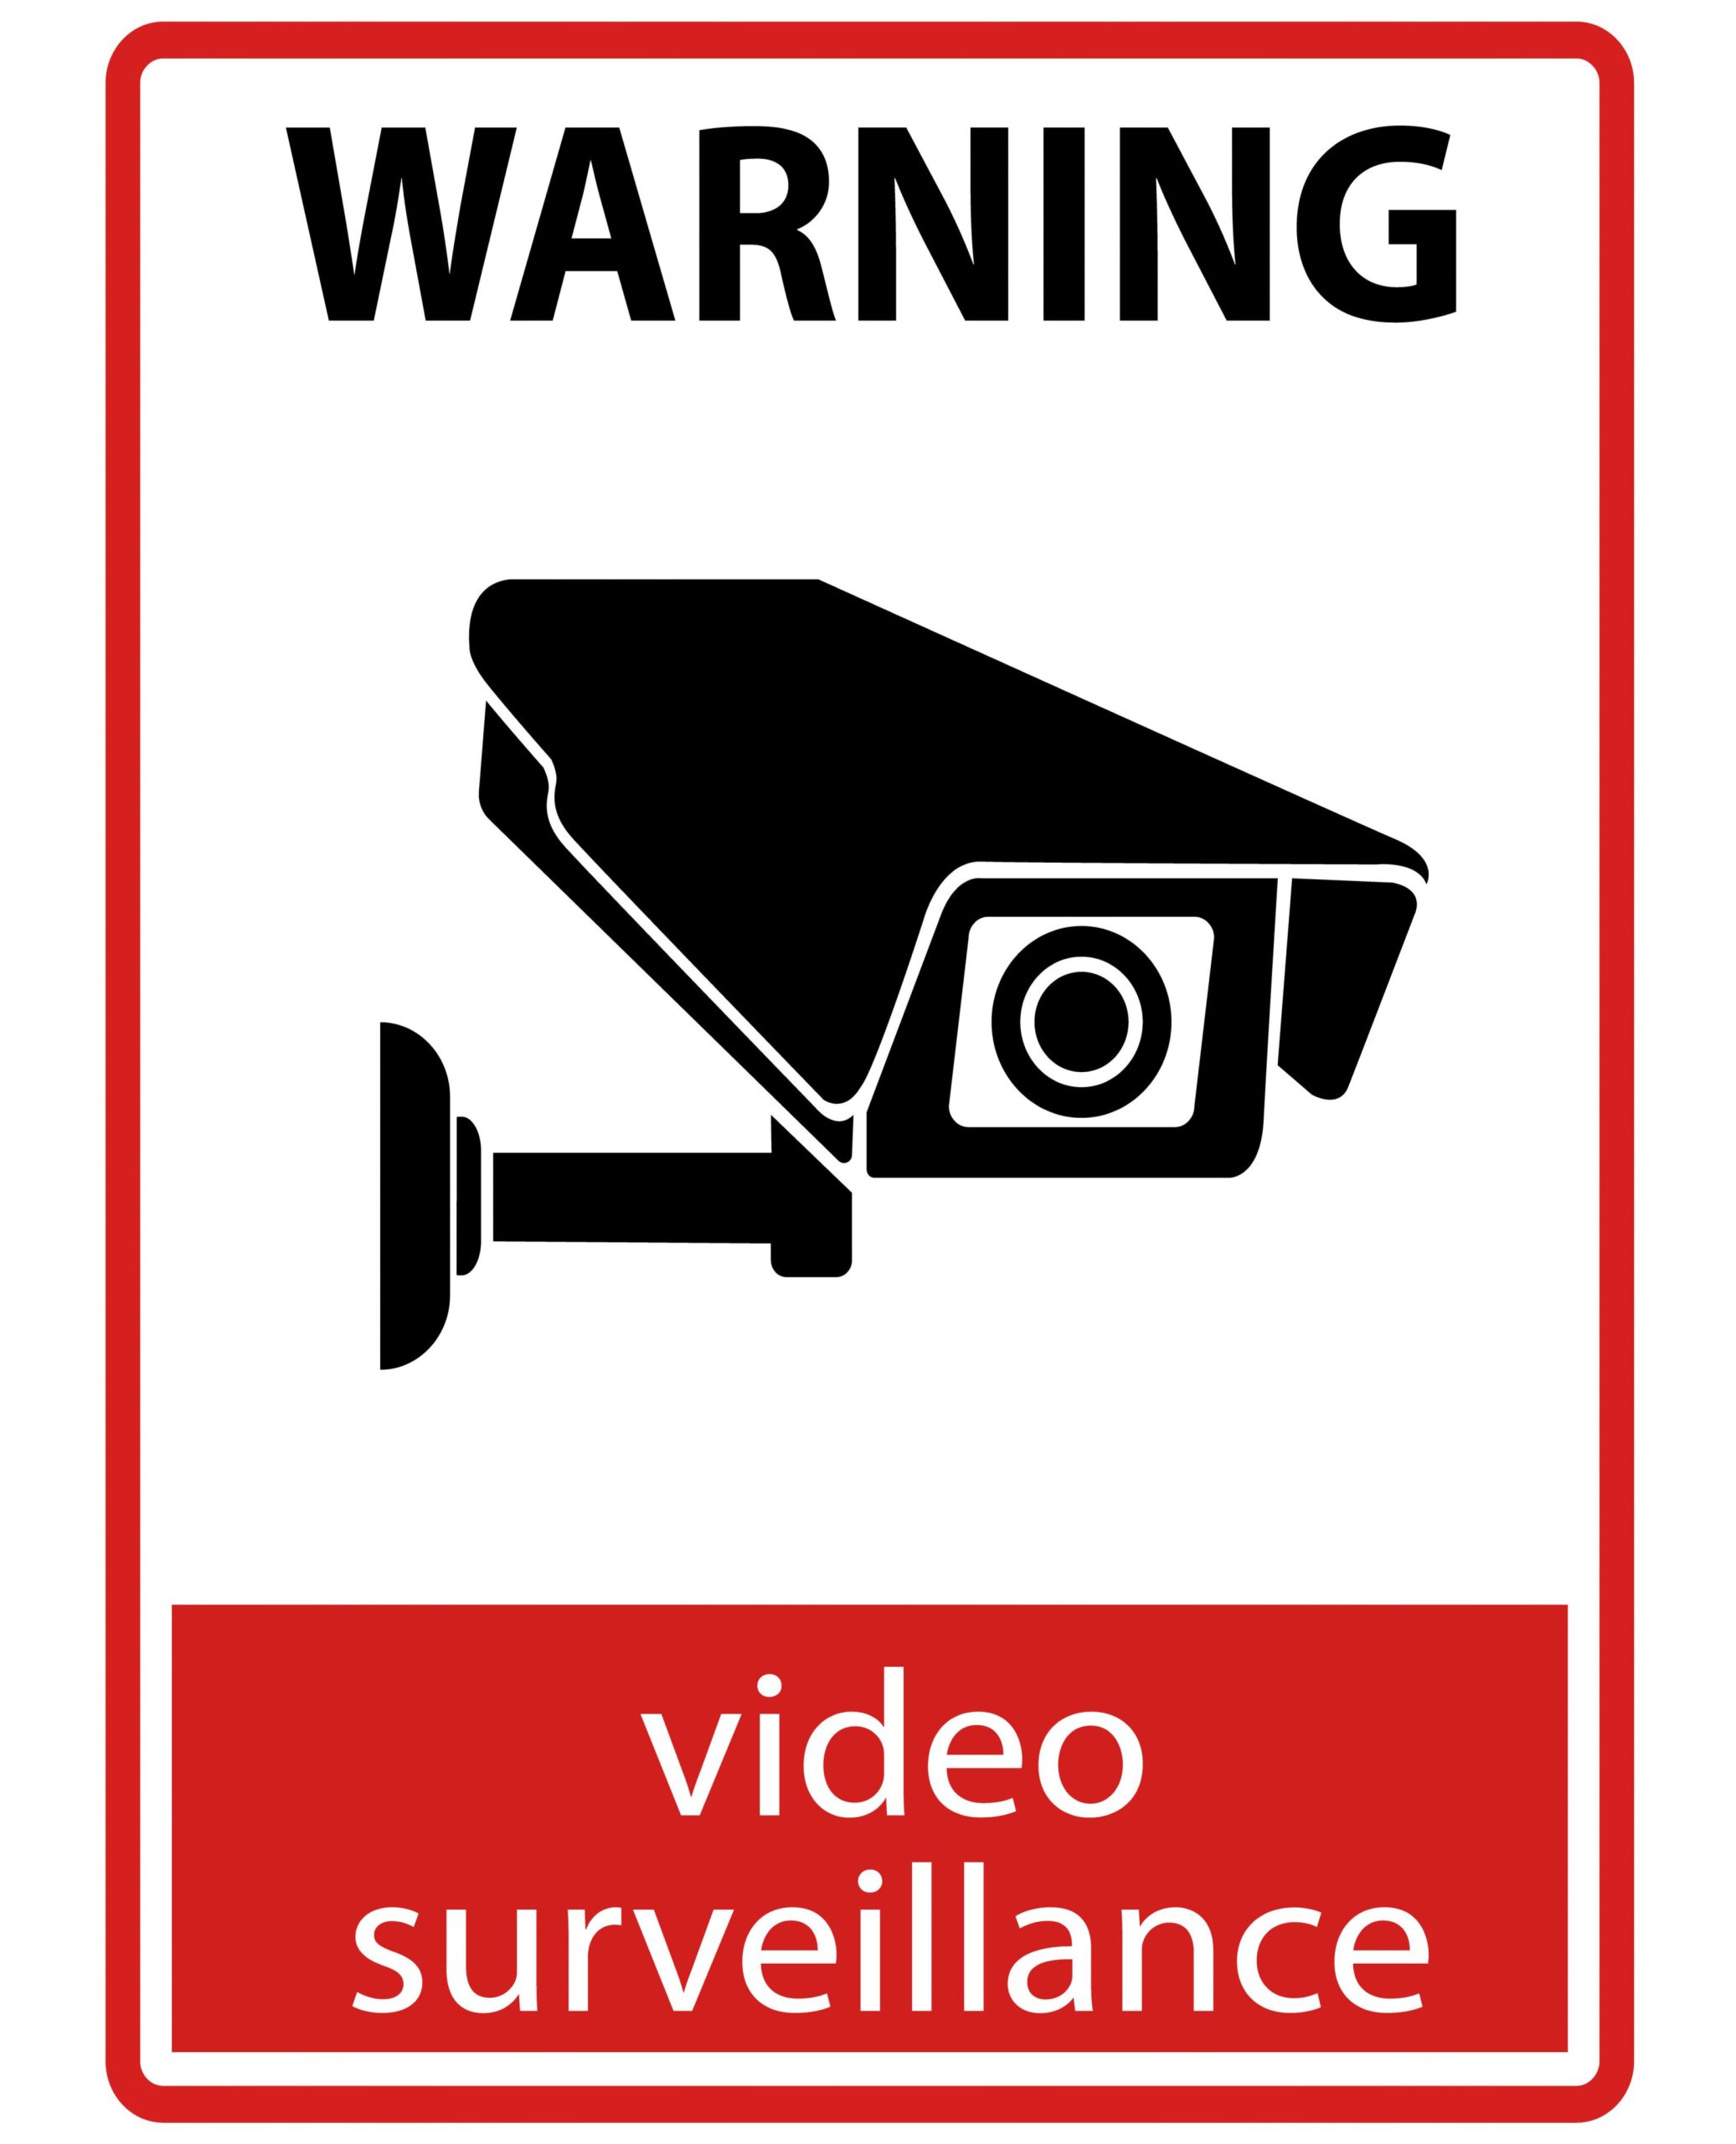 Crime On the Rise: Protect Your Business With an Surveillance Alarm System Installation